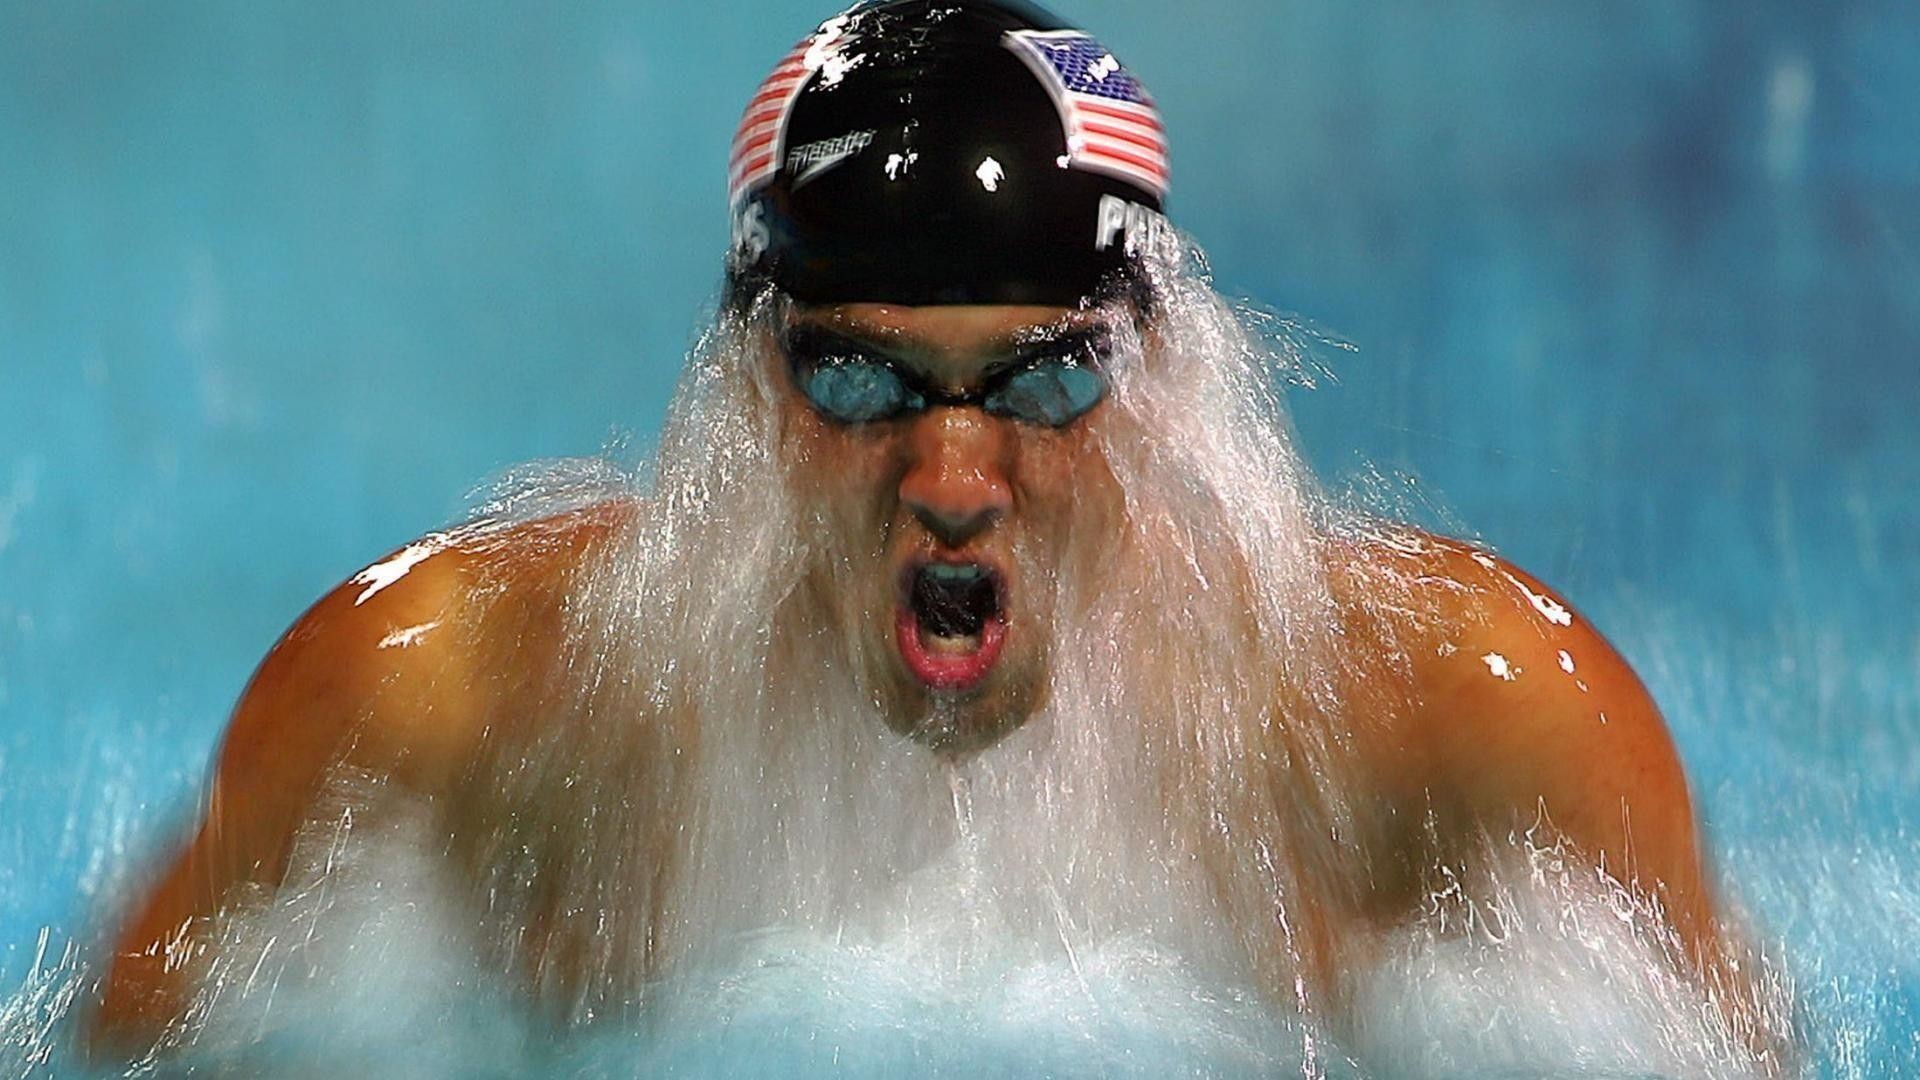 1920x1080 Awesome Michael Phelps HD Wallpaper Free Download